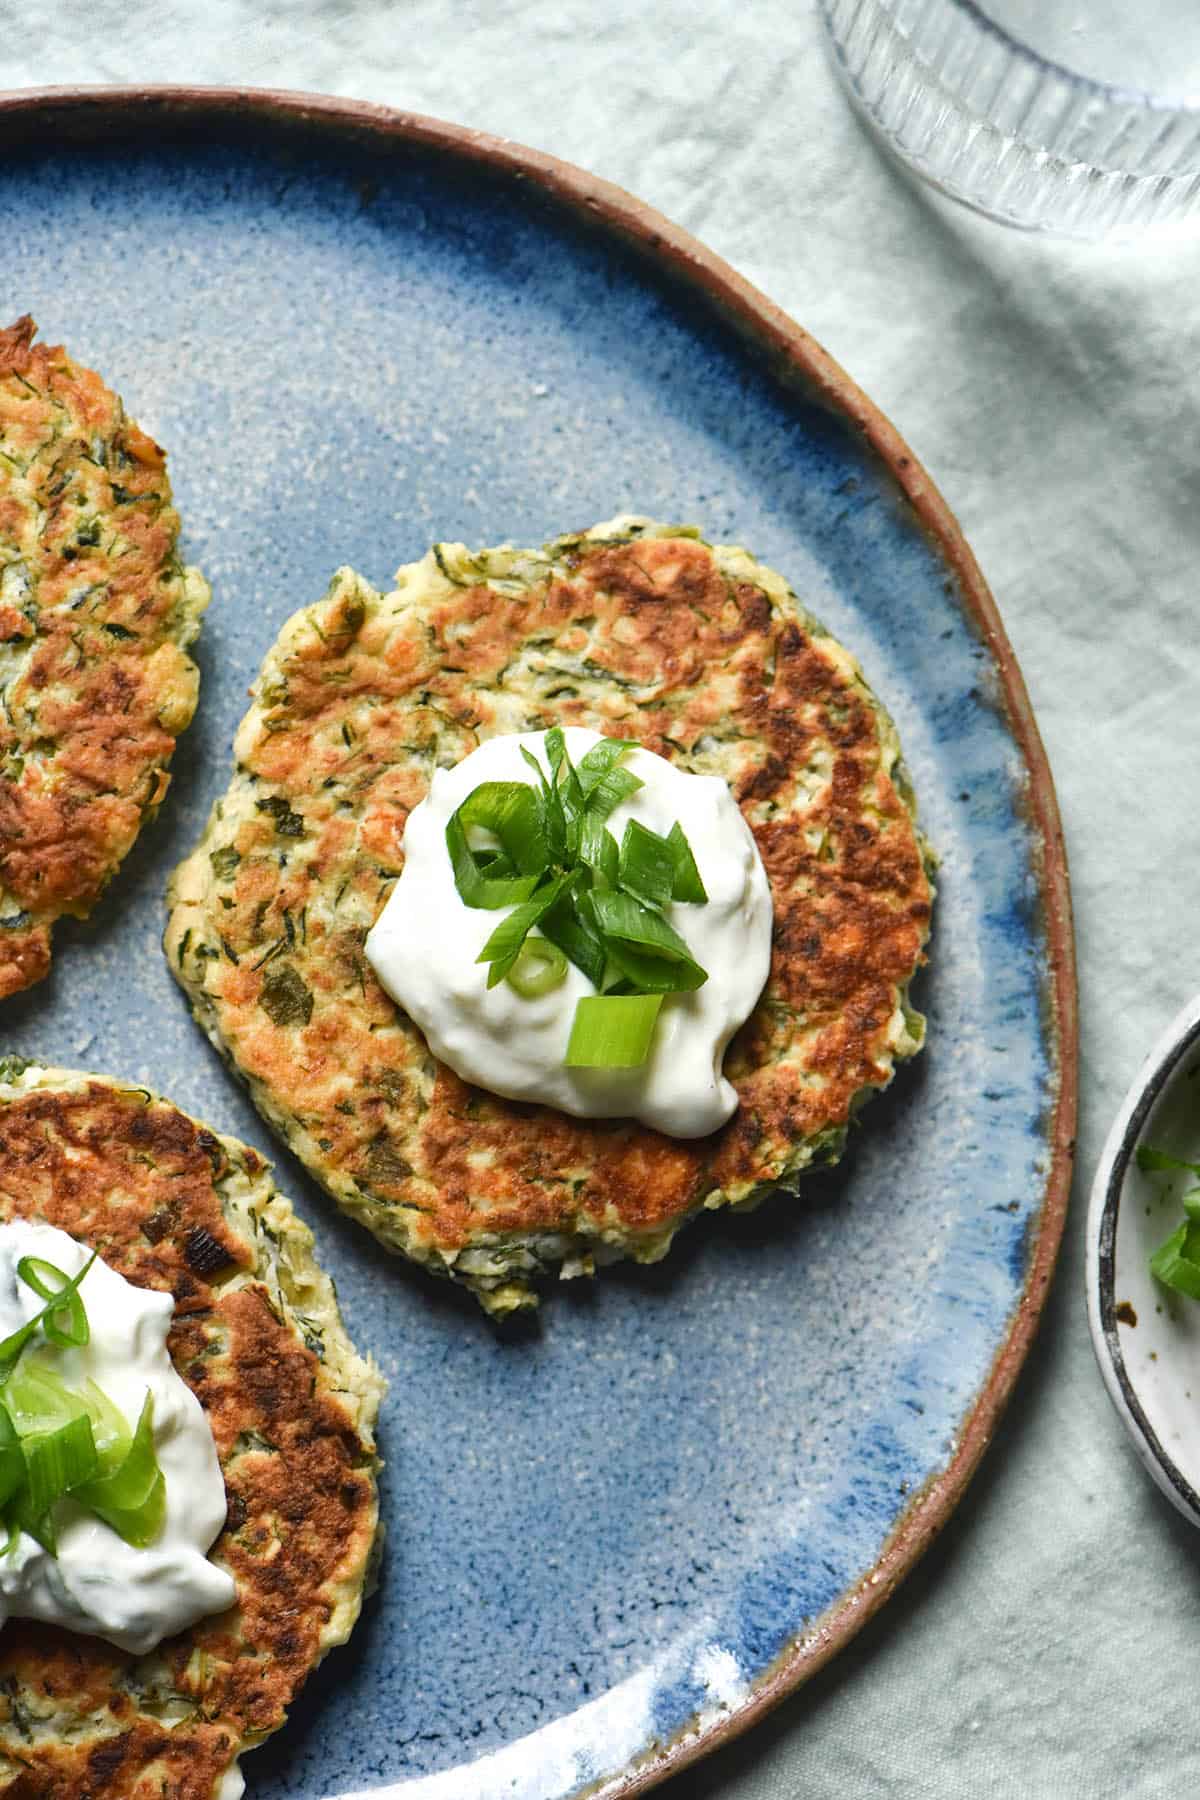 An aerial view of three gluten free zucchini fritters topped with a dollop of yoghurt and spring onion greens on a bright blue ceramic plate. The plate sits on a pale green linen tablecloth and a glass of water and pinch bowl sit to the right of the plate